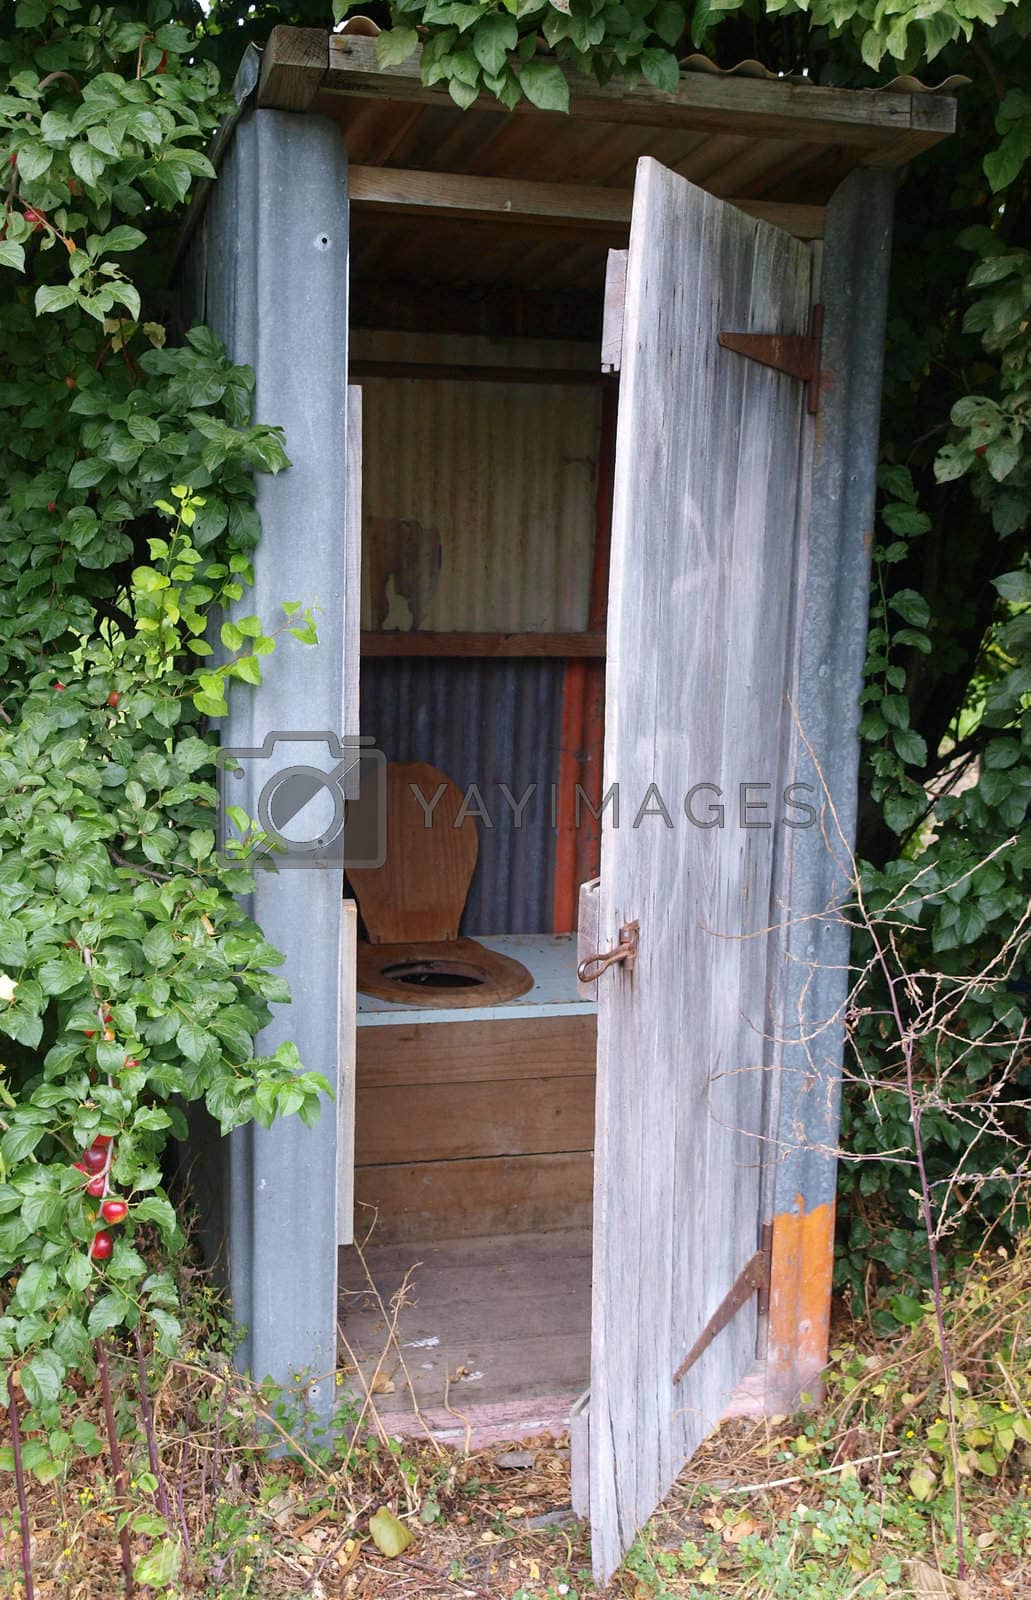 Royalty free image of Old Outhouse by MargoJH